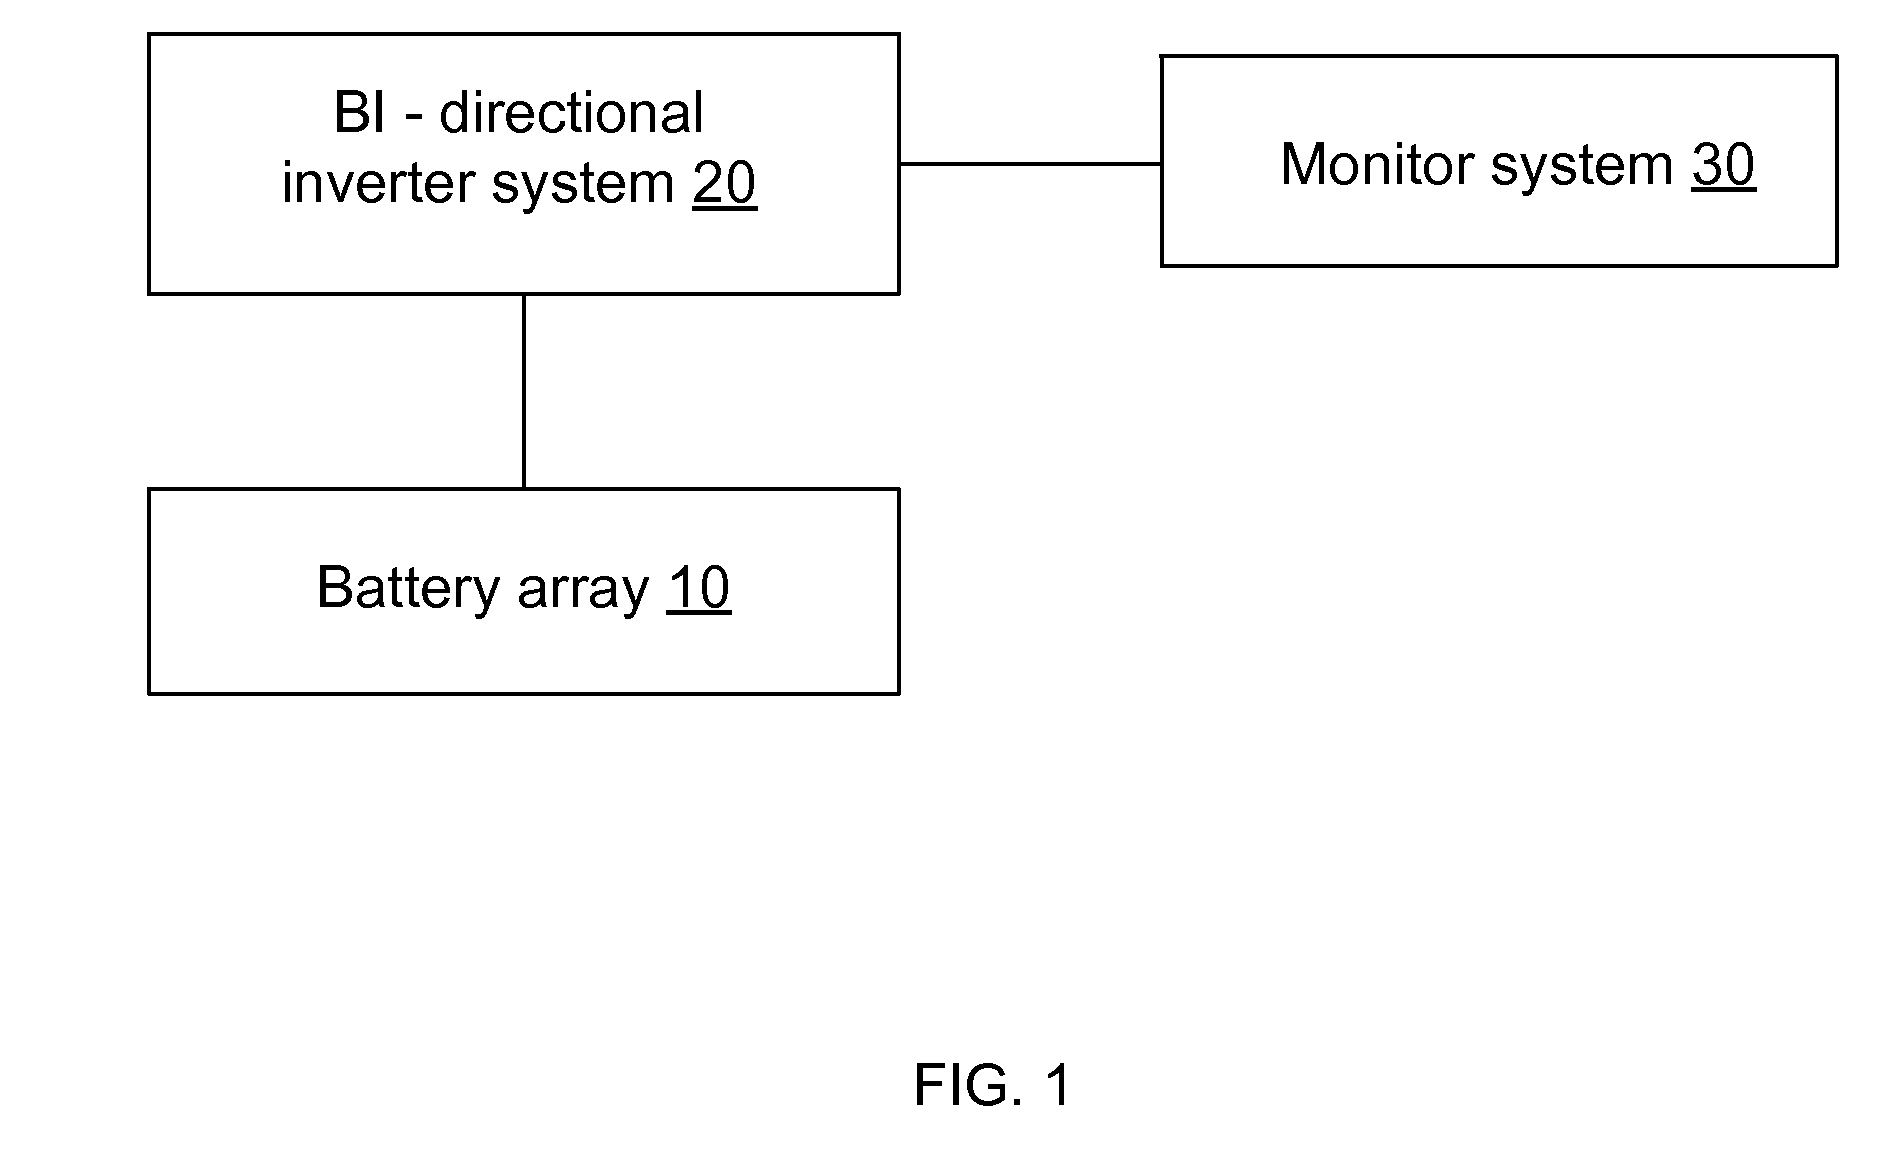 Battery-Based Grid Energy Storage for Balancing the Load of a Power Grid